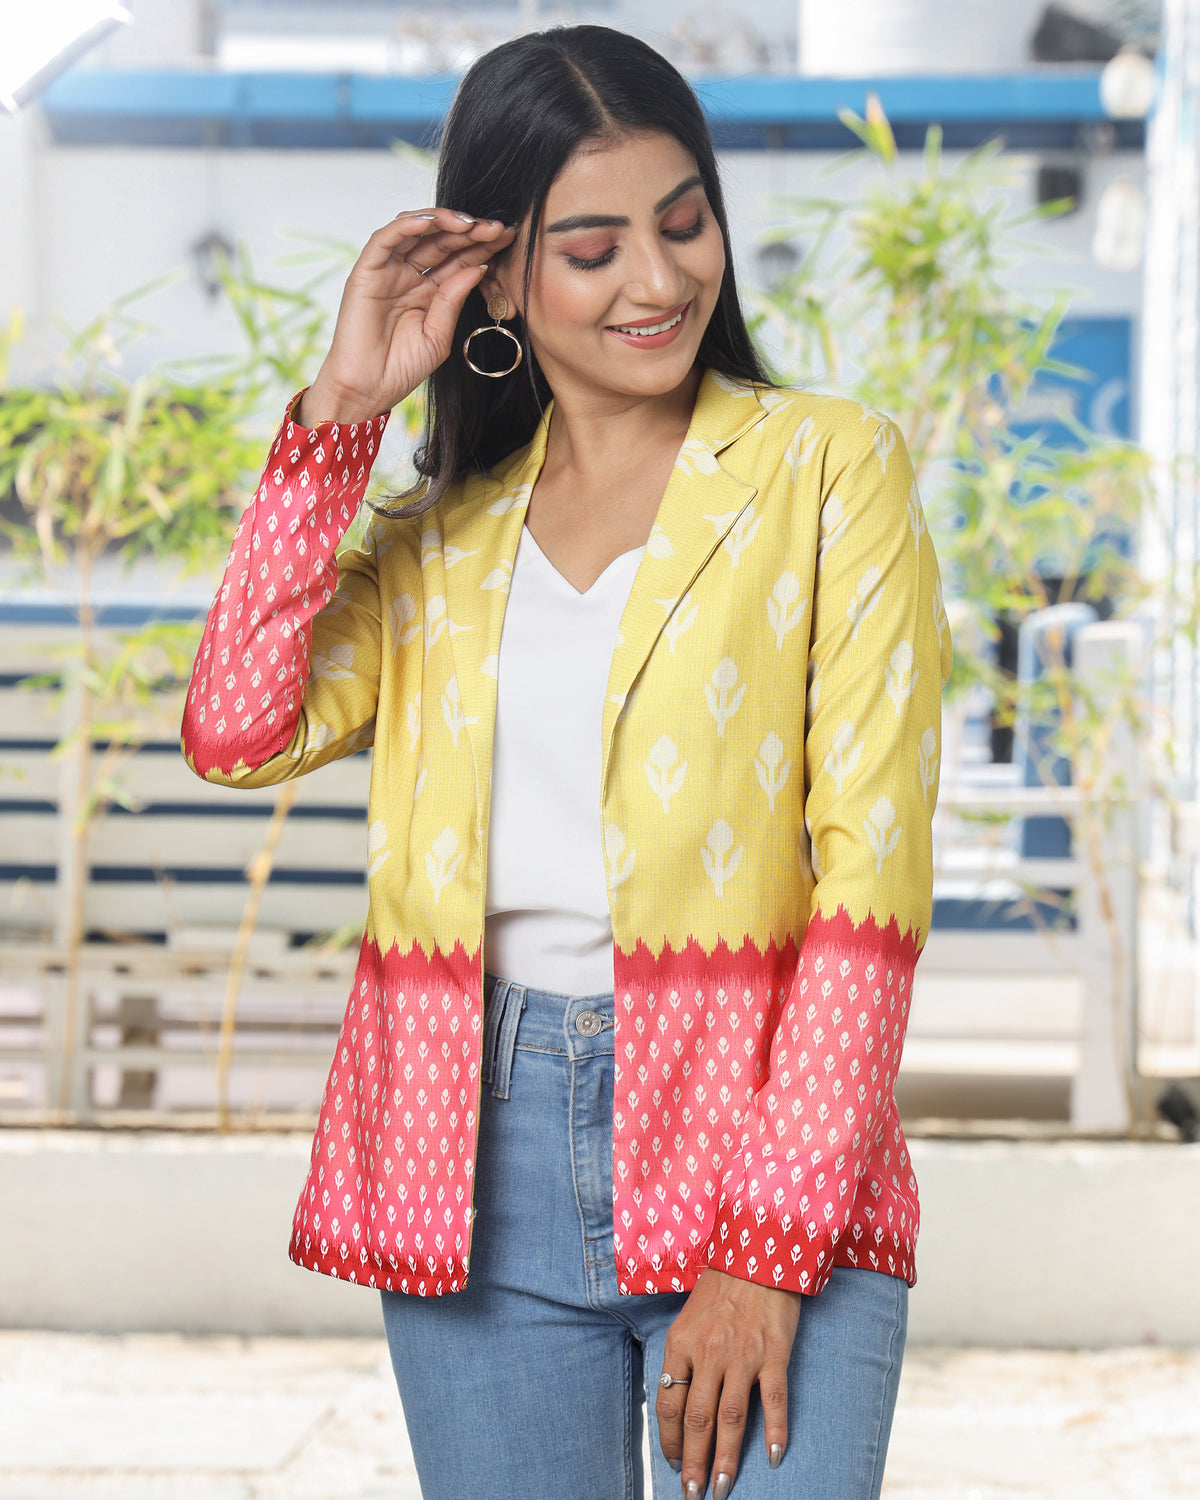 Crafted Legacy: Jacket For The Confident Woman